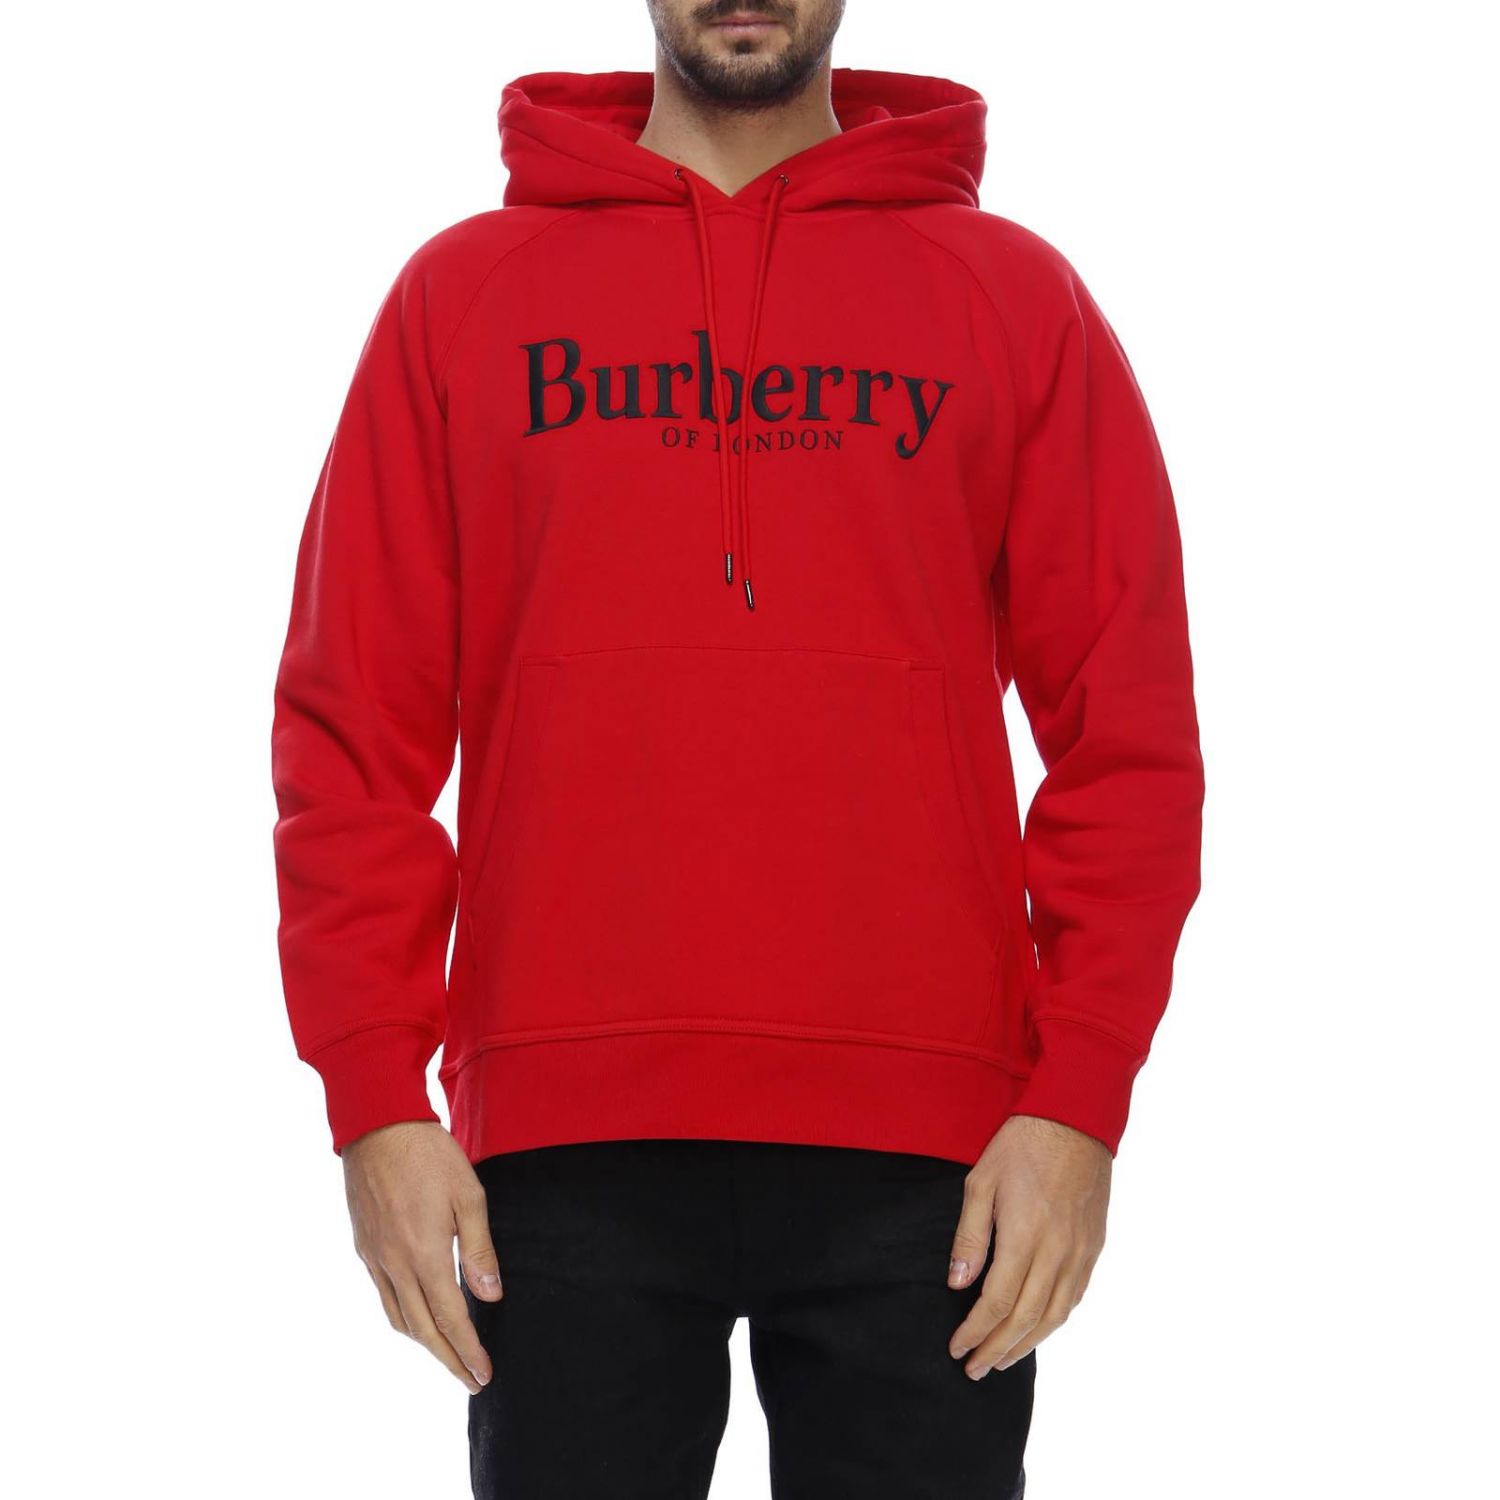 burberry red jumper